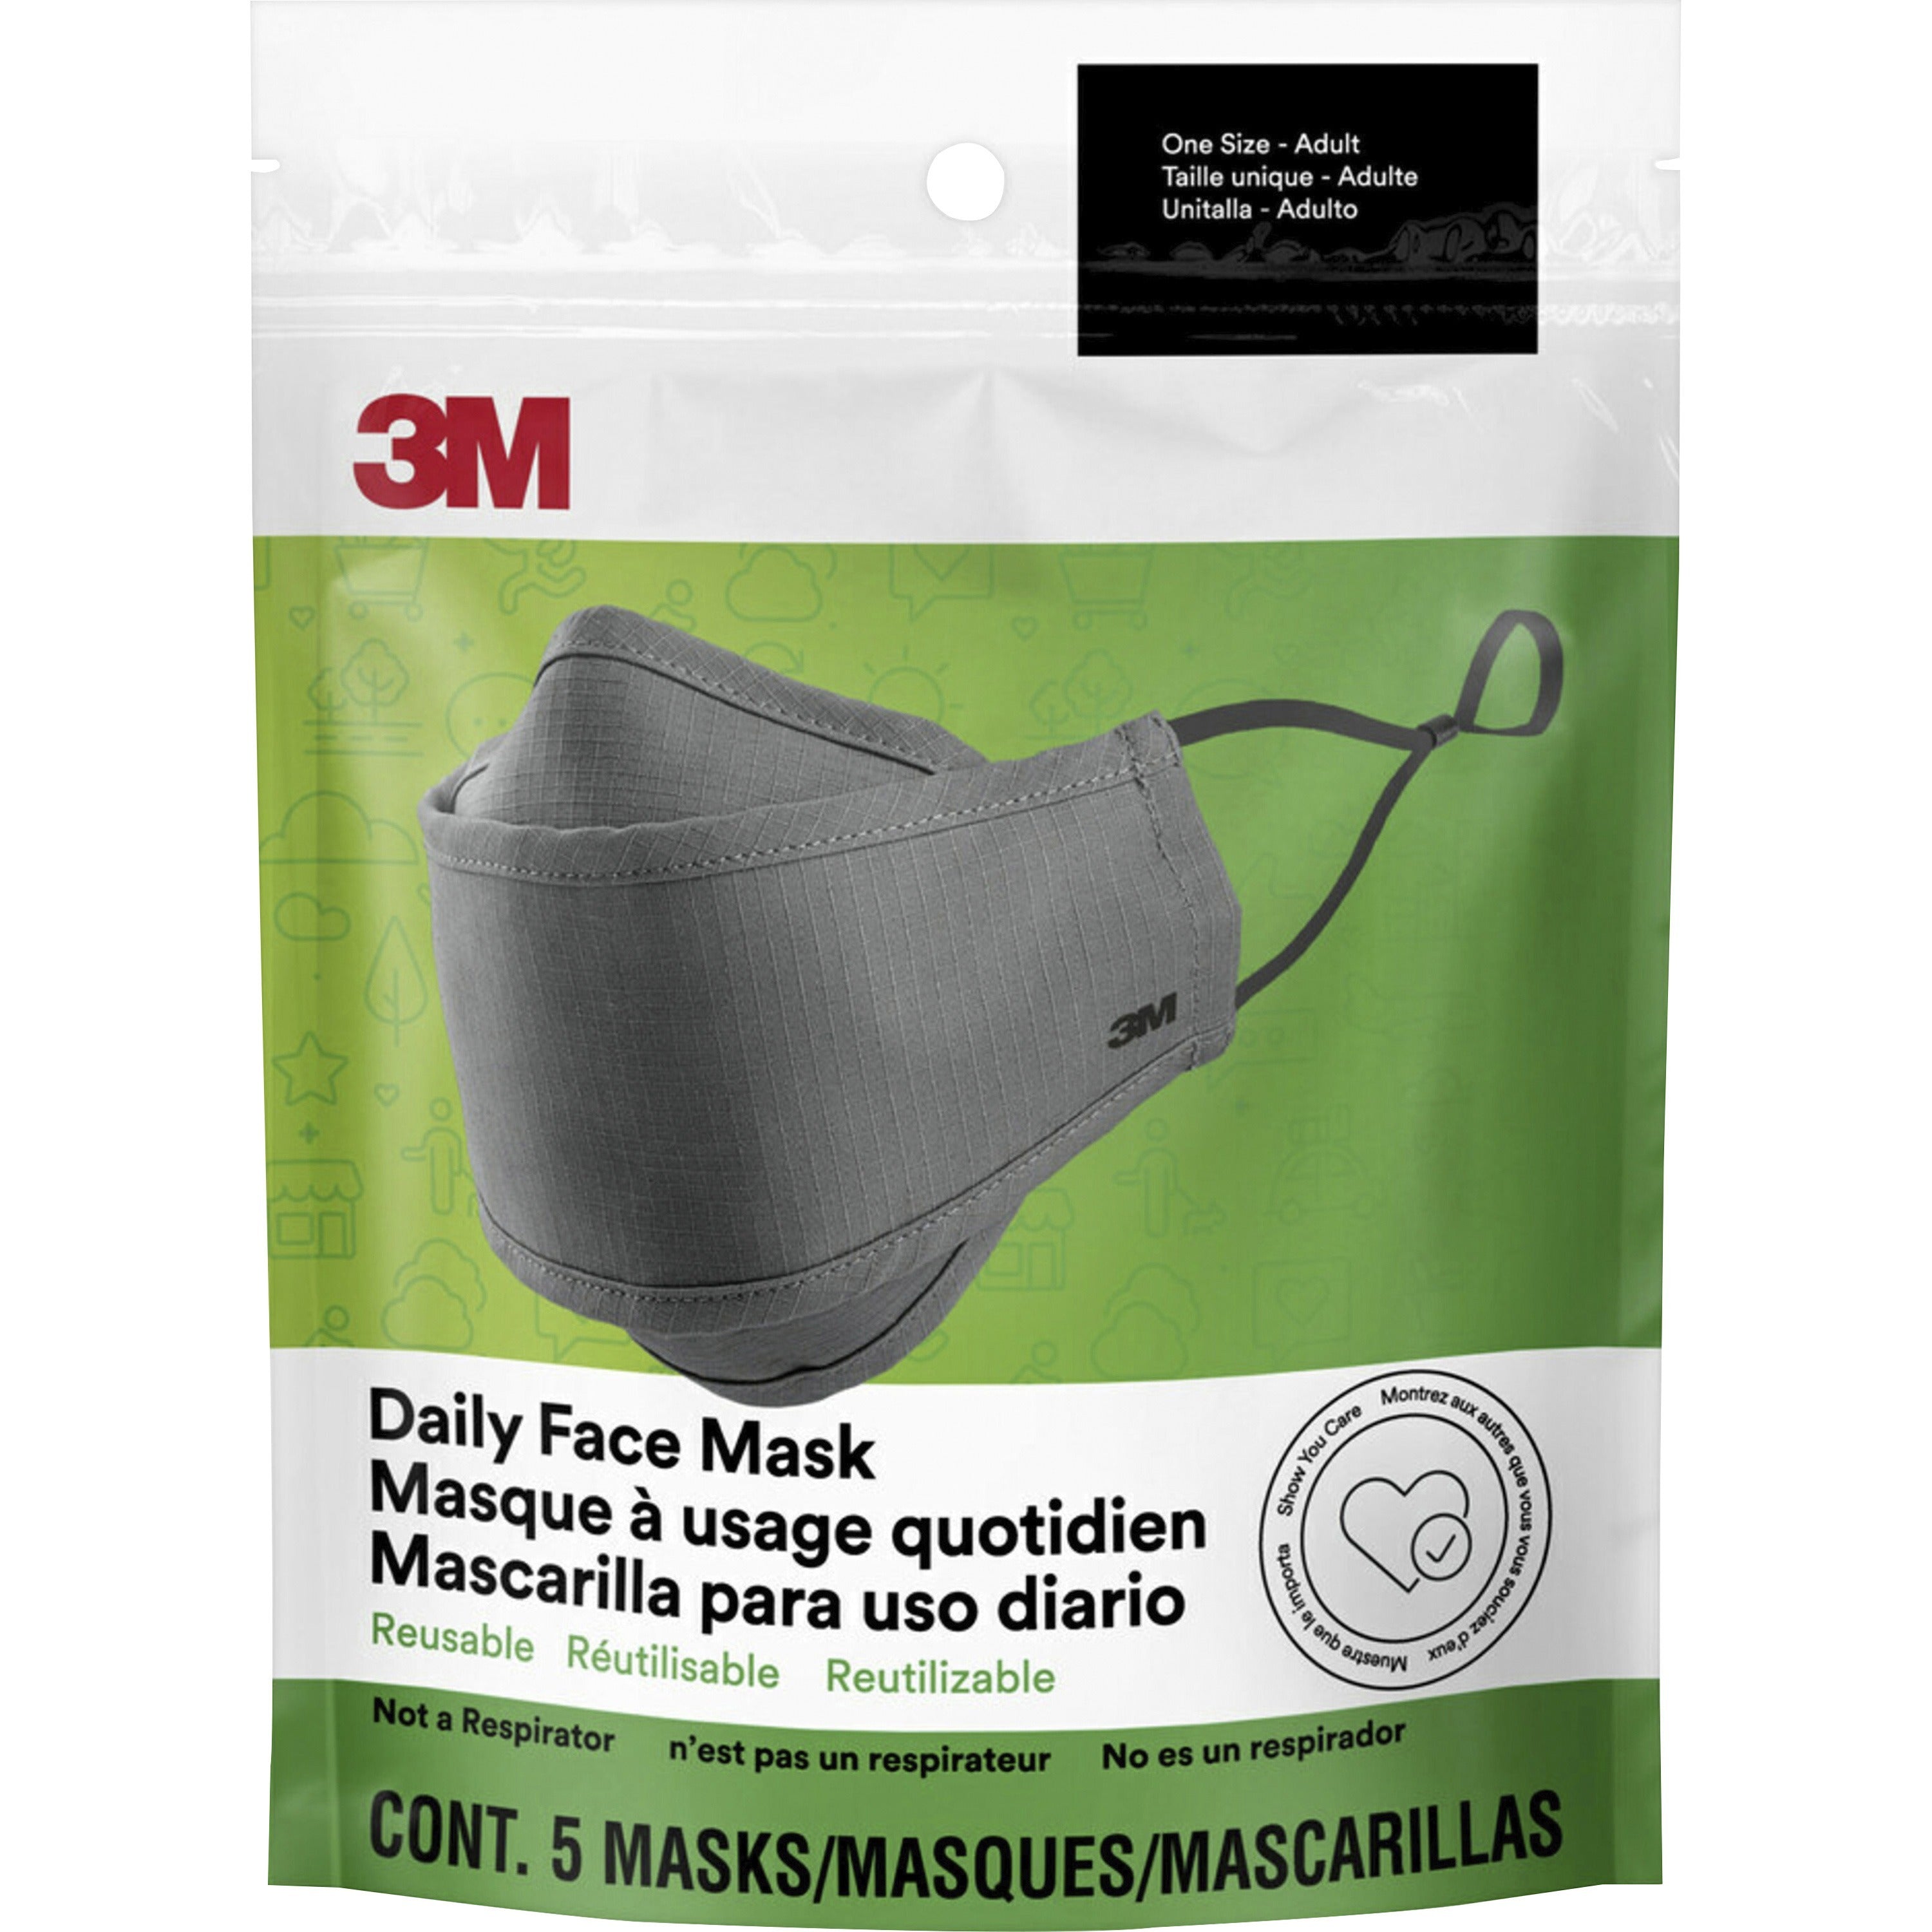 3m-daily-face-masks-recommended-for-face-indoor-outdoor-office-transportation-cotton-fabric-gray-lightweight-breathable-adjustable-elastic-loop-nose-clip-comfortable-washable-5-pack_mmmrfm1005 - 1